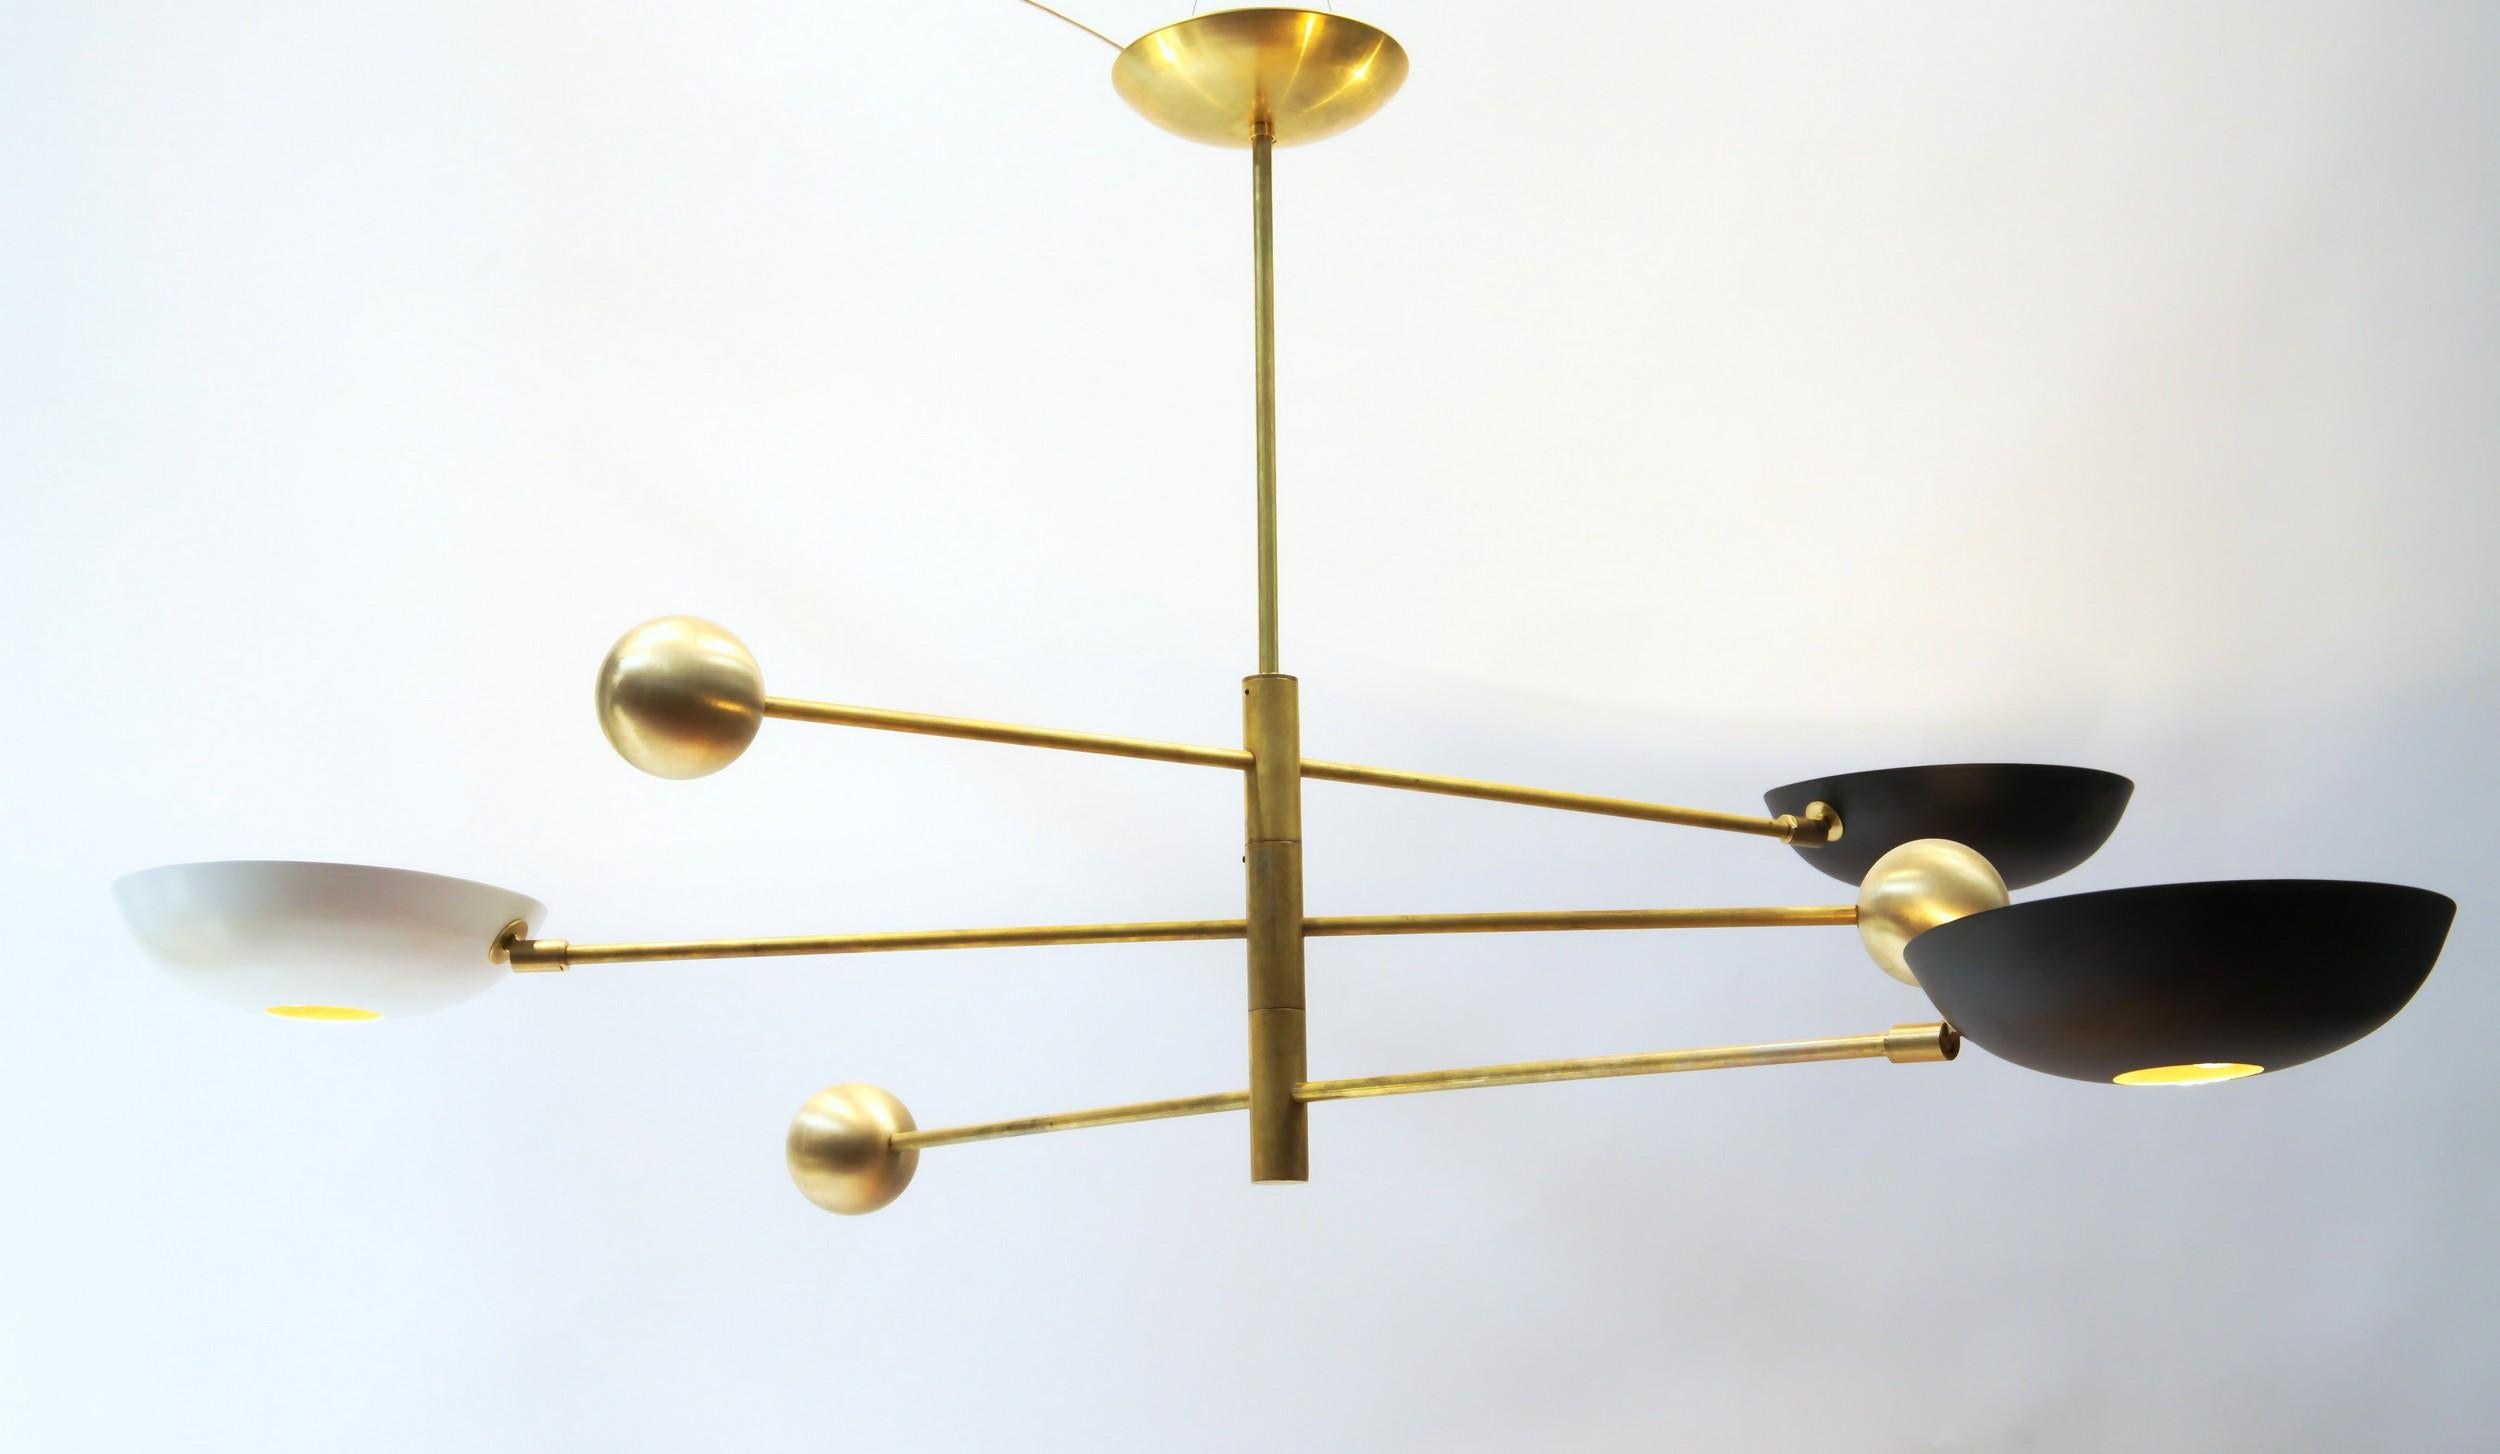 Metal Compact Orbitale Brass Chandelier 3 Rotating Balanced Arms, Low Ceiling Featured For Sale